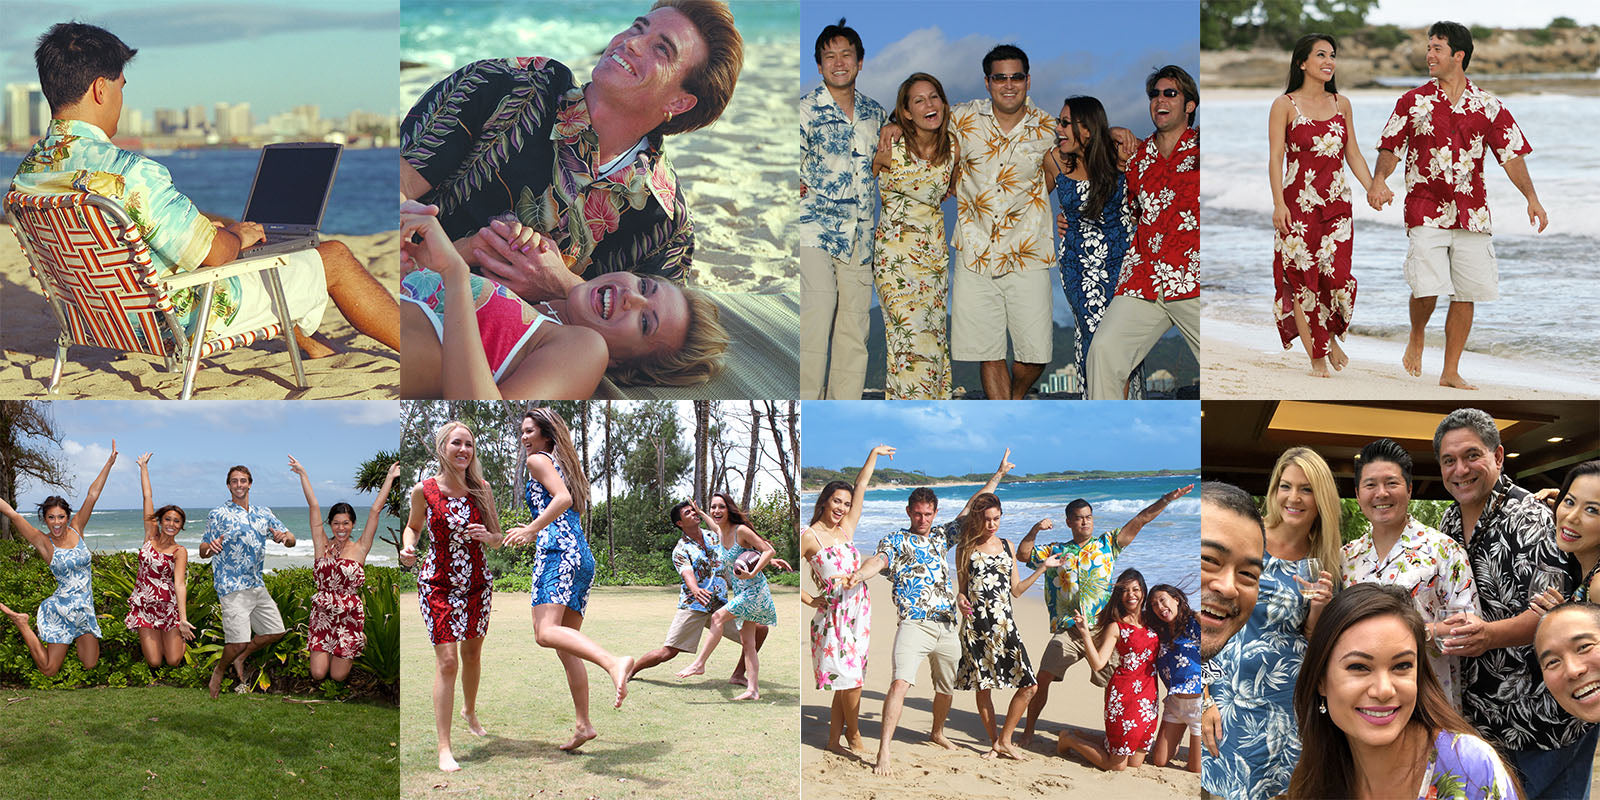 Fun times in Hawaiian shirts and dresses over the years